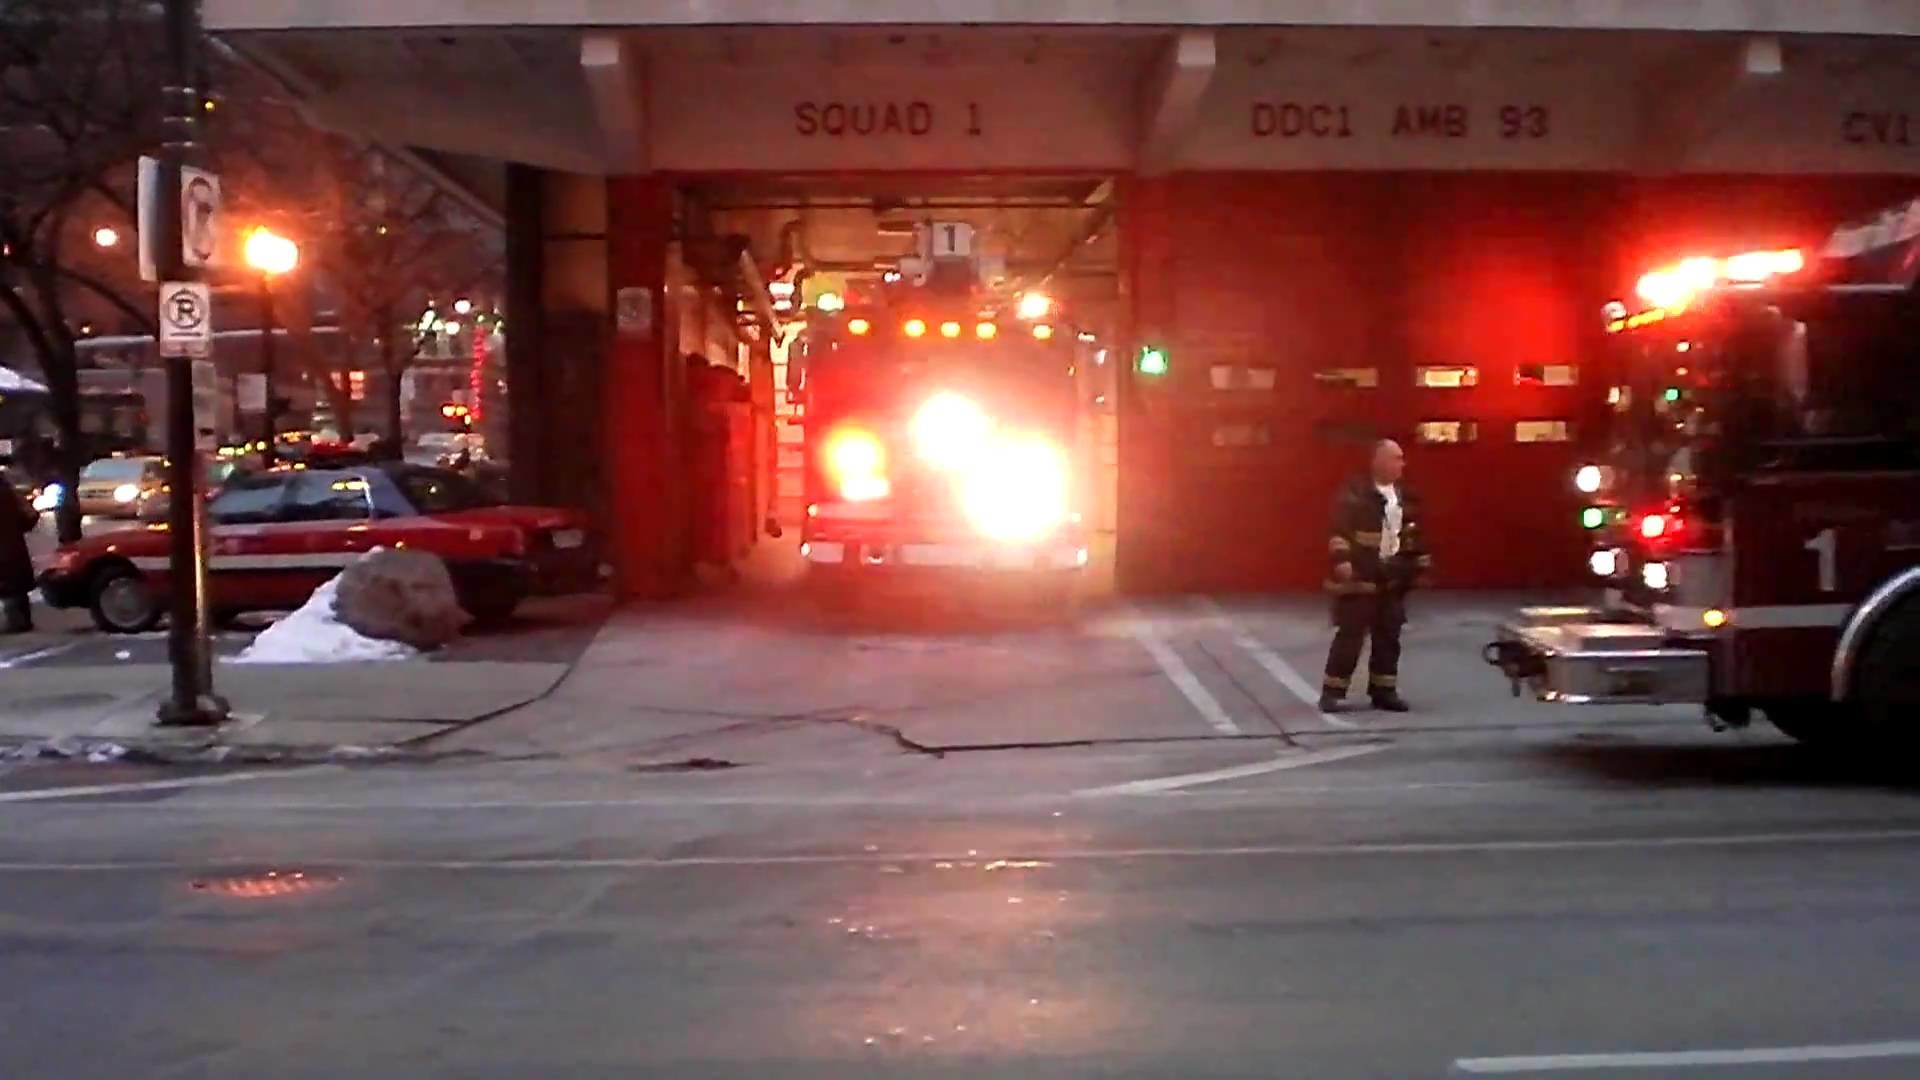 1920x1080 Squad 1 and 1A - Return To Quarters - Chicago Fire Department - YouTube